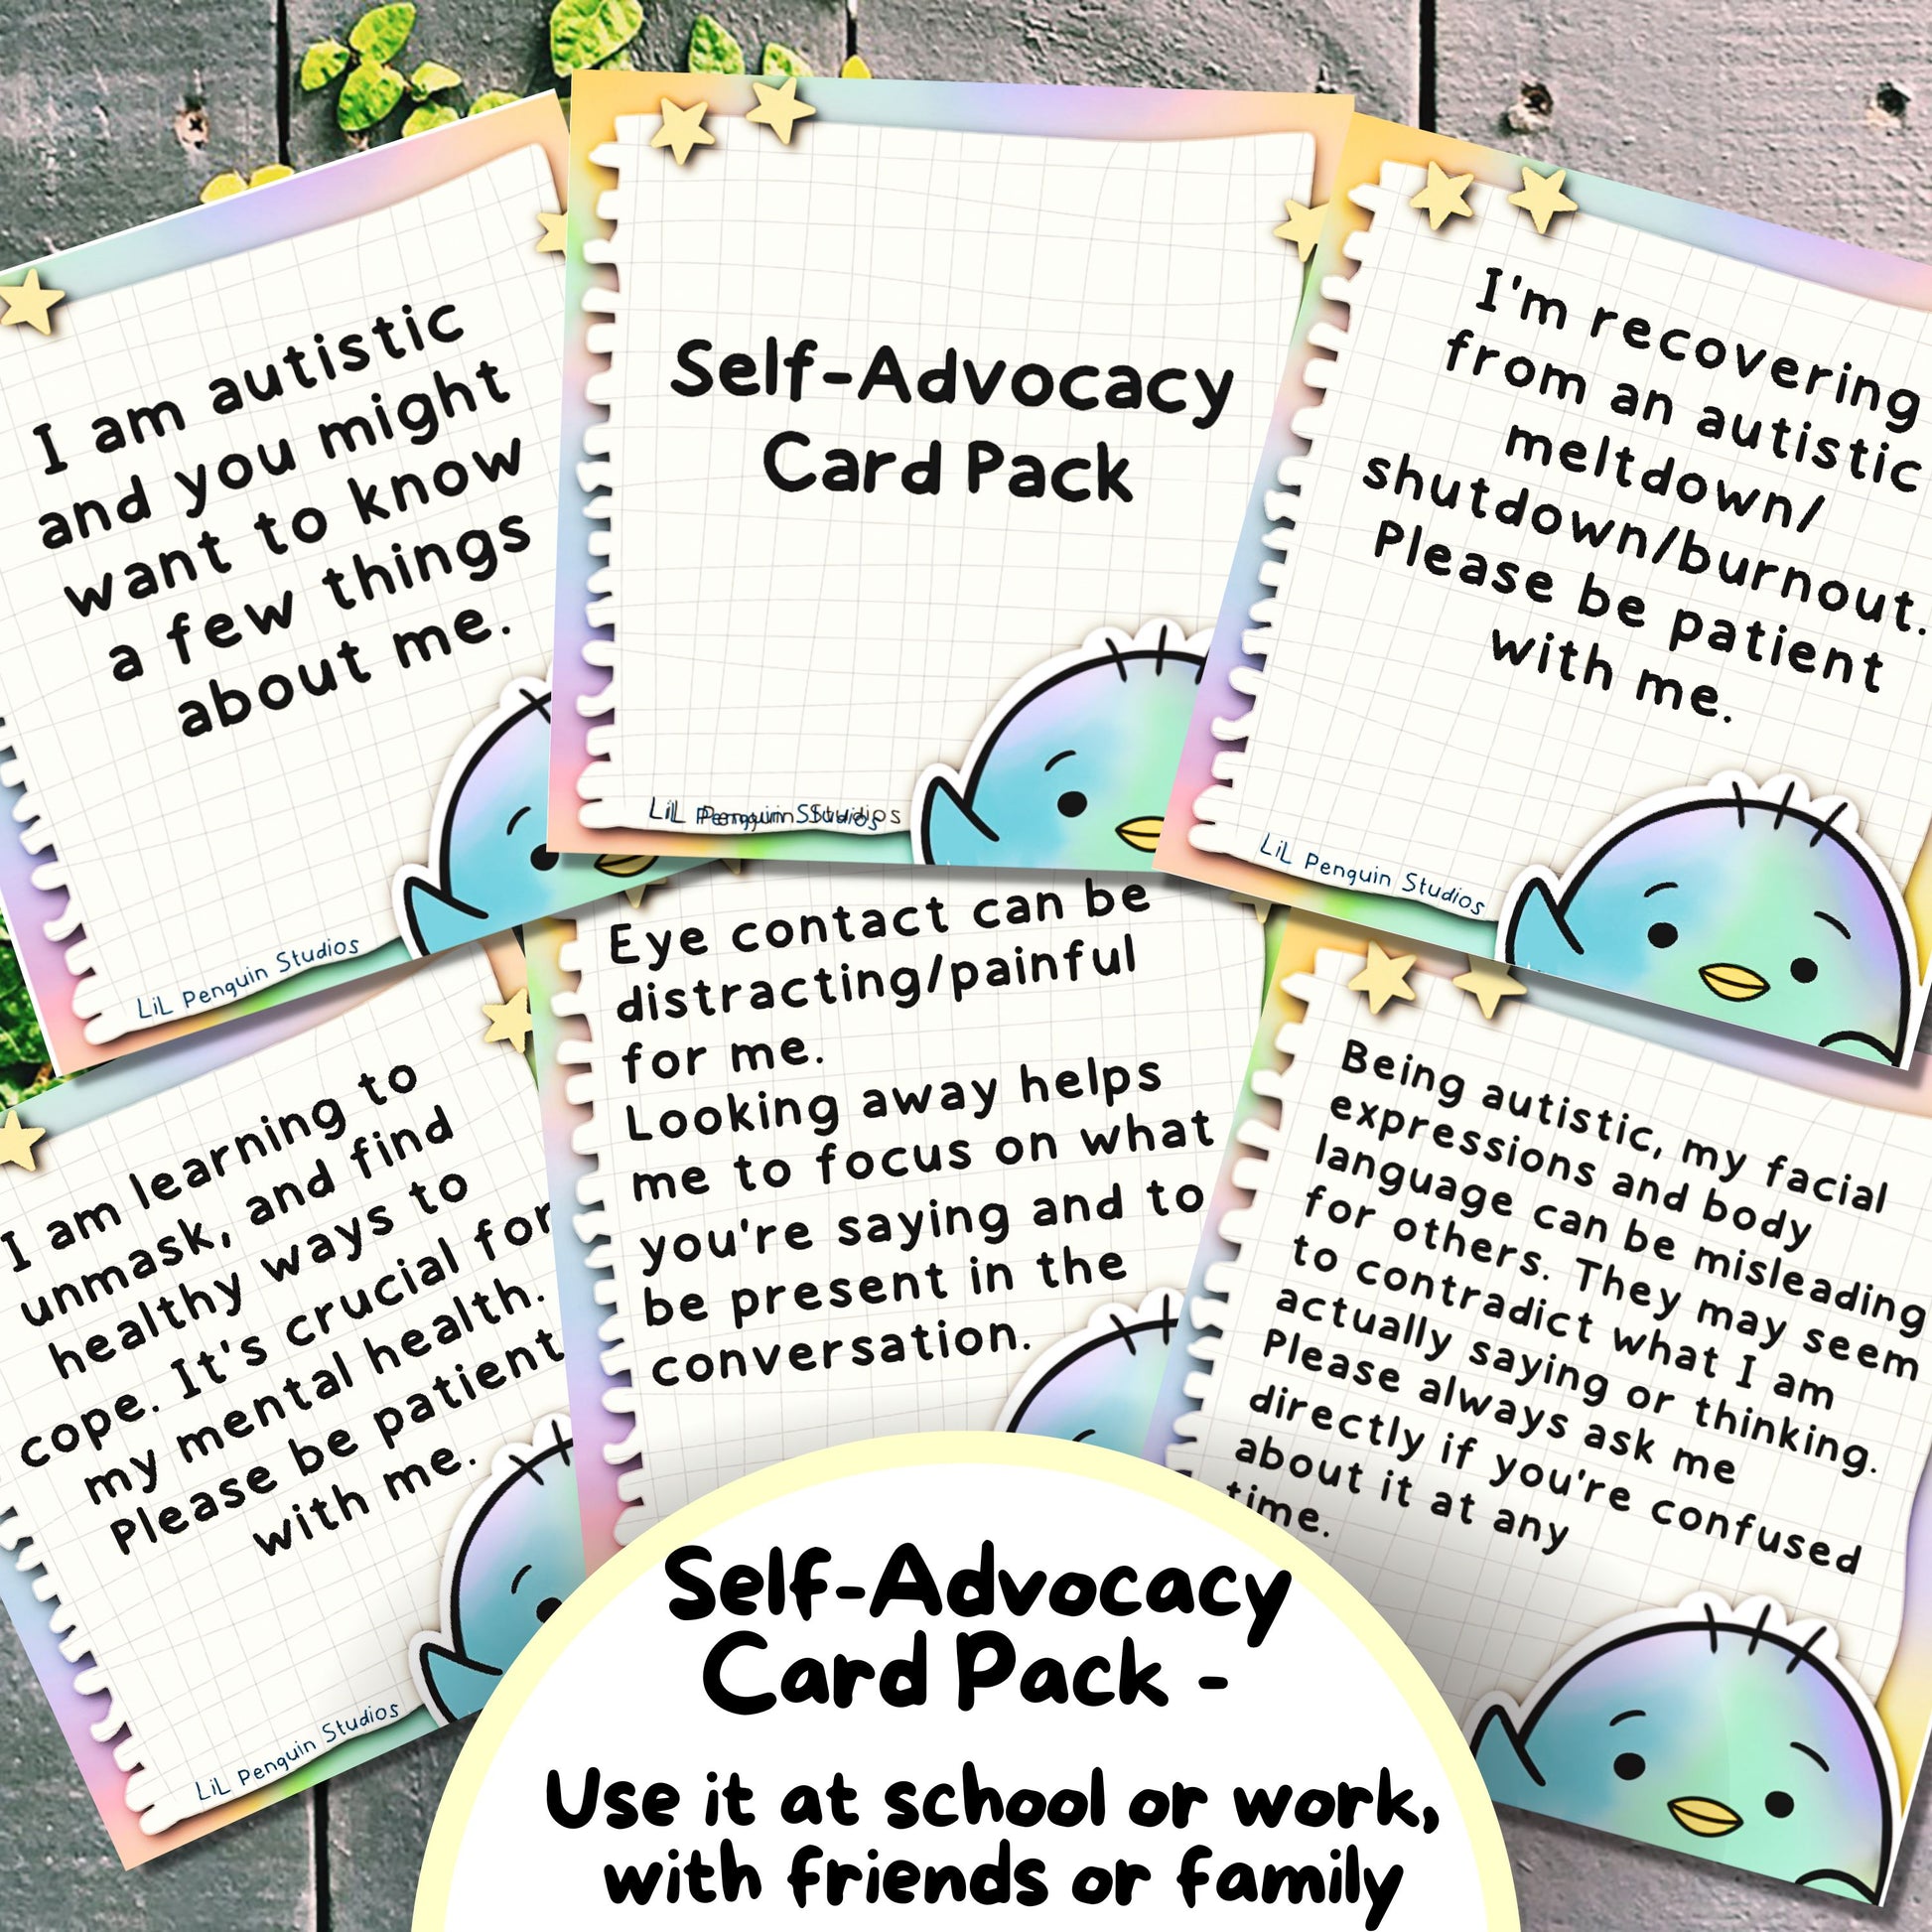 Communication Cards with Explanations (Use it ast school or work, with friends or family - Autism Self-Advocacy Card Pack written and hand-drawn by an autistic artist (LiL Penguin Studios( 